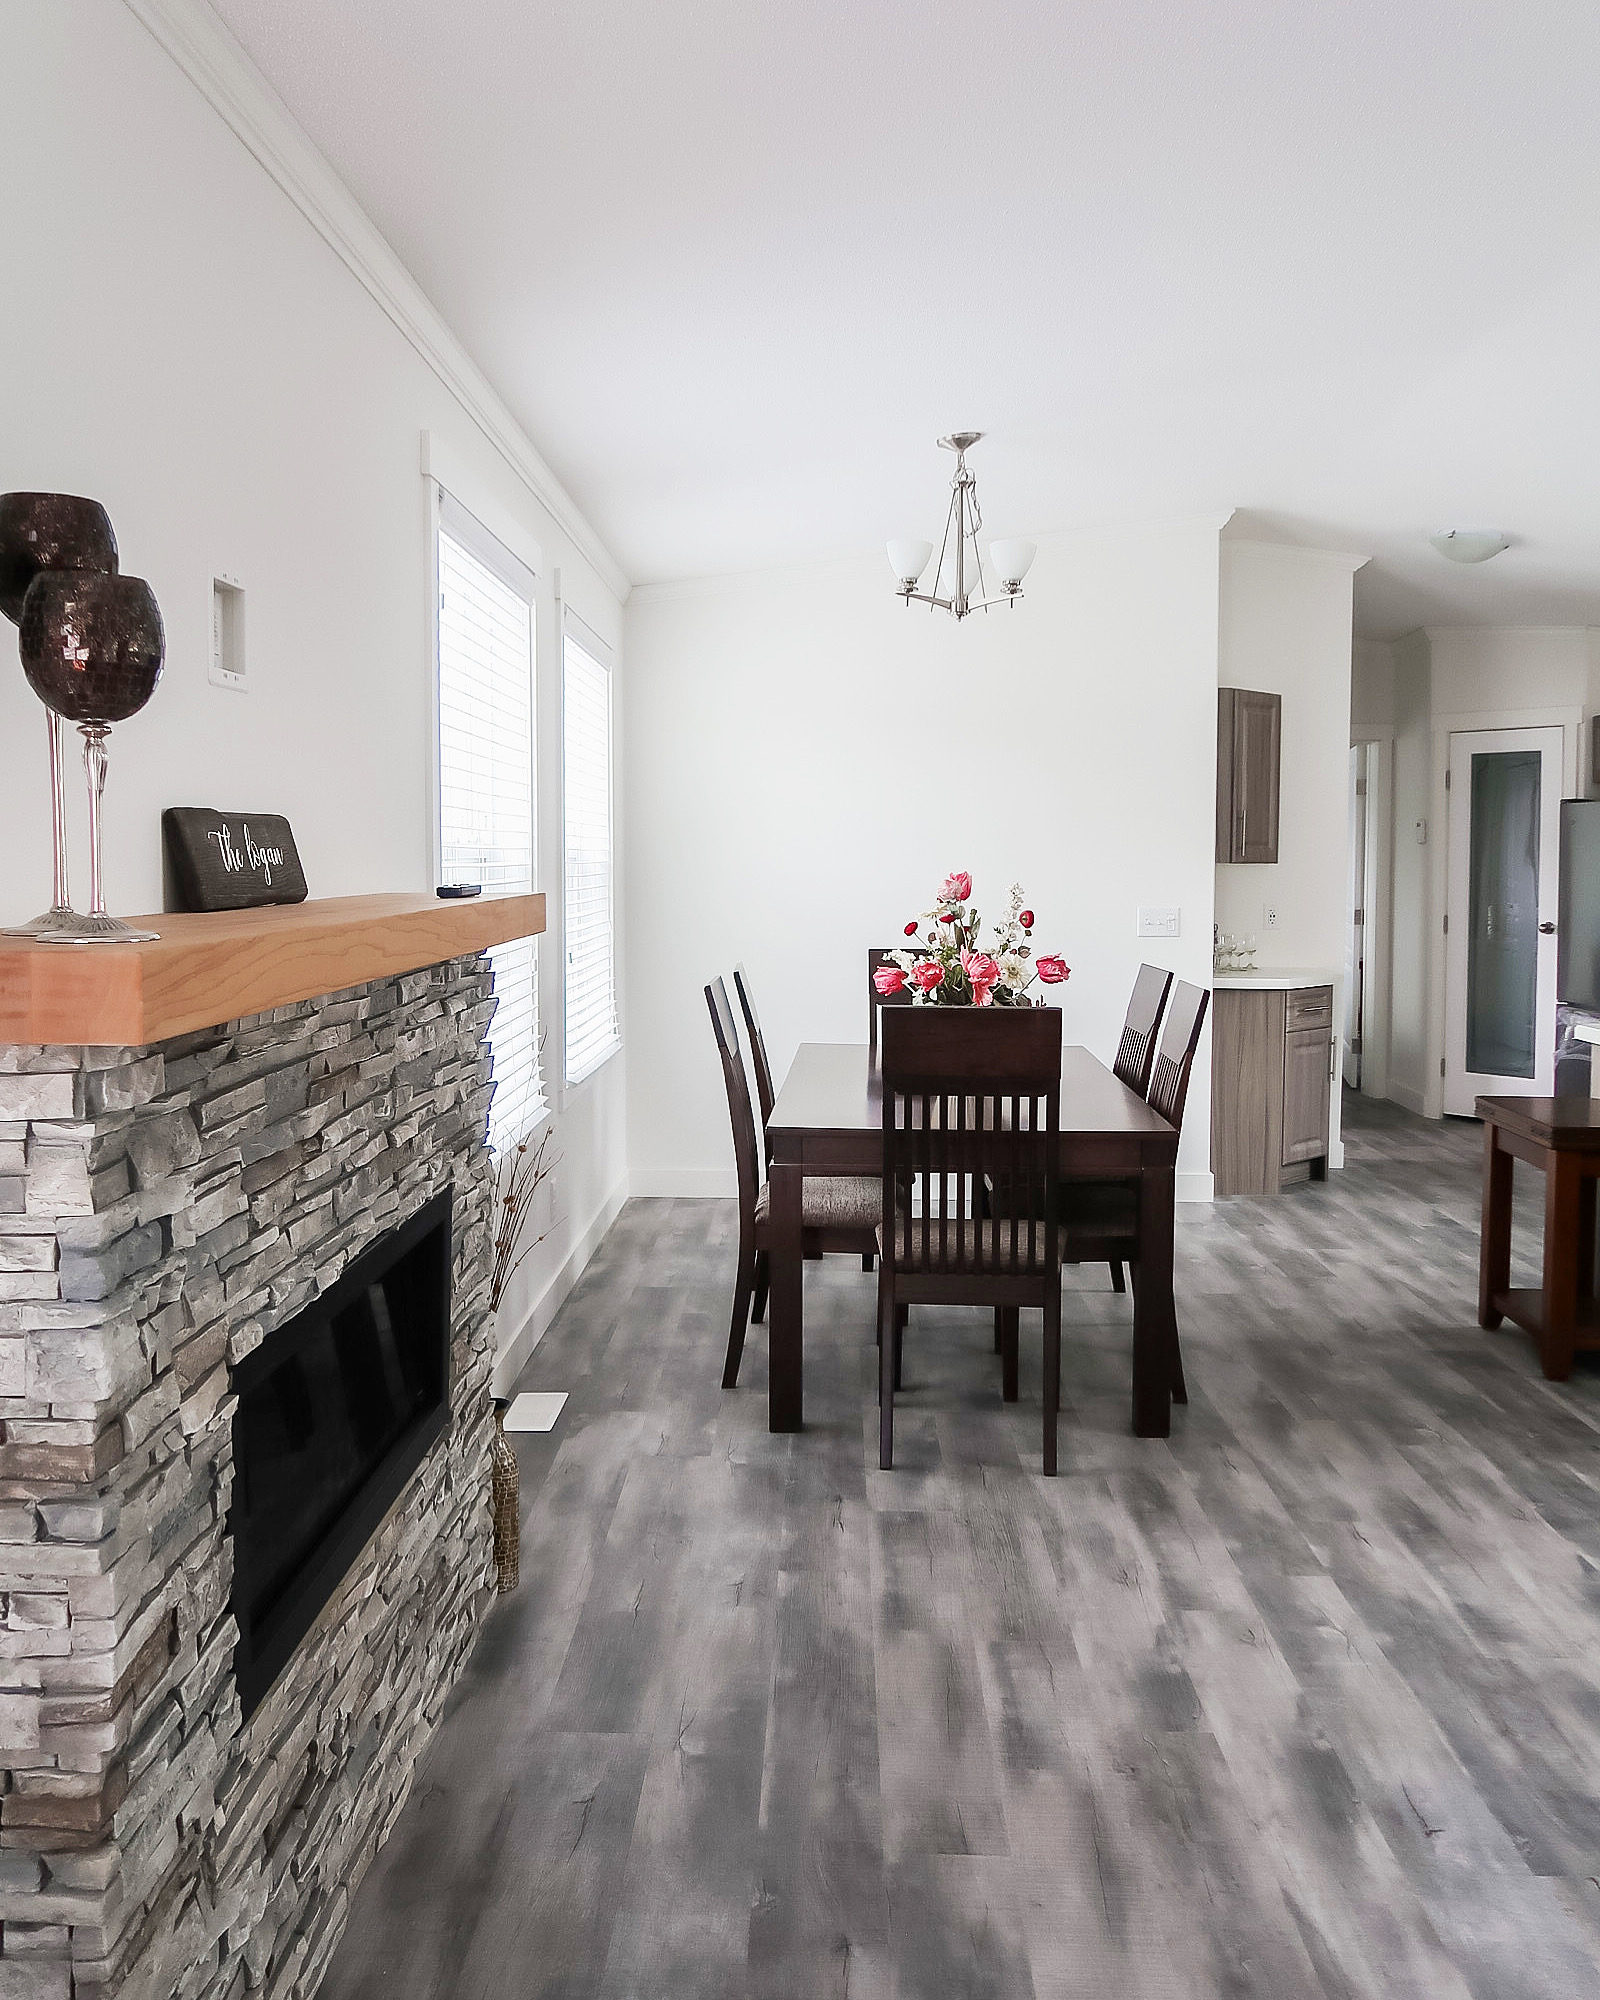 view of the dining room and kitchen of the Logan showhome built by countryside manufactured homes